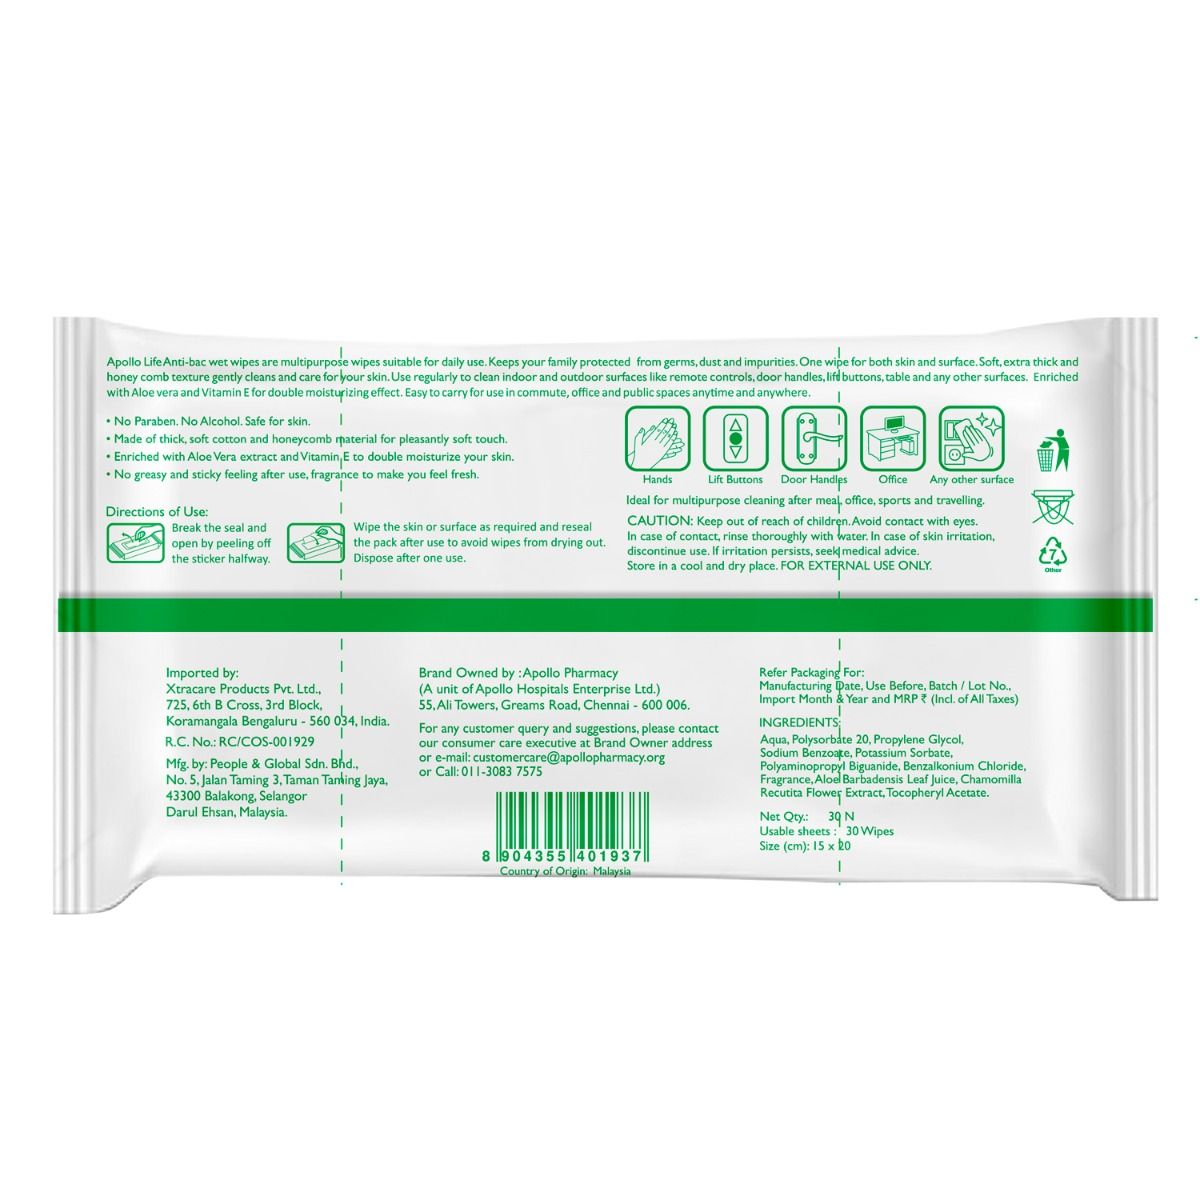 Apollo Pharmacy Hygiene Plus Anti Bacterial Wet Wipes, 30 Count, Pack of 1 